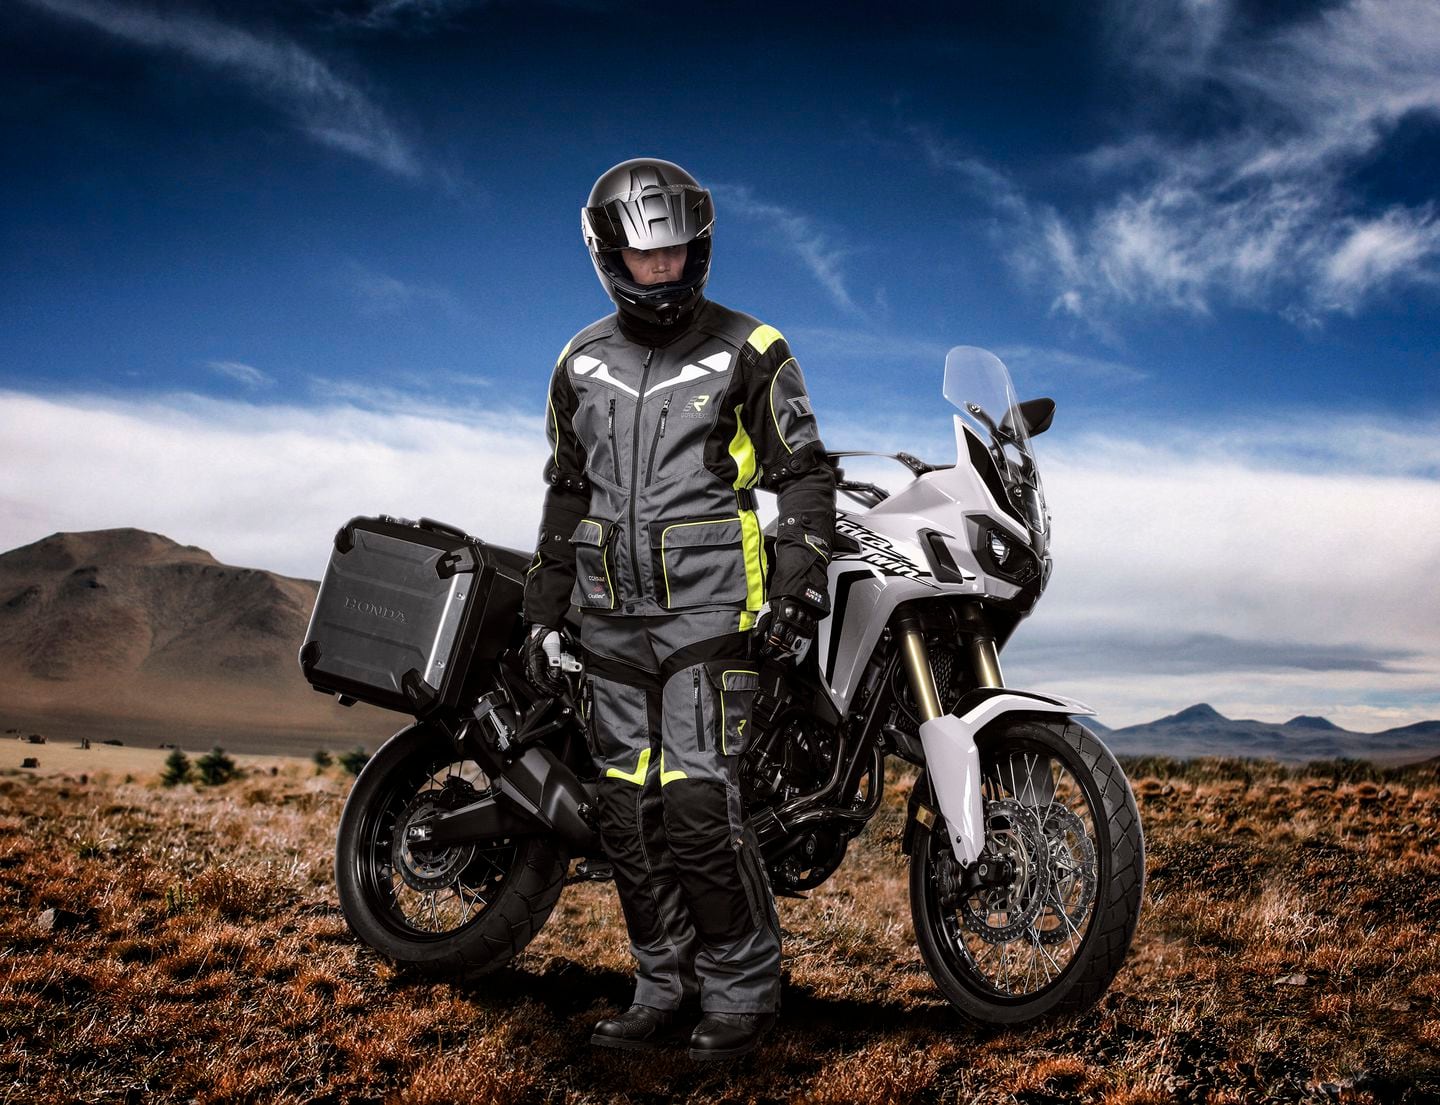 New Product: Rukka Roughroad Adventure Suit | Motorcyclist